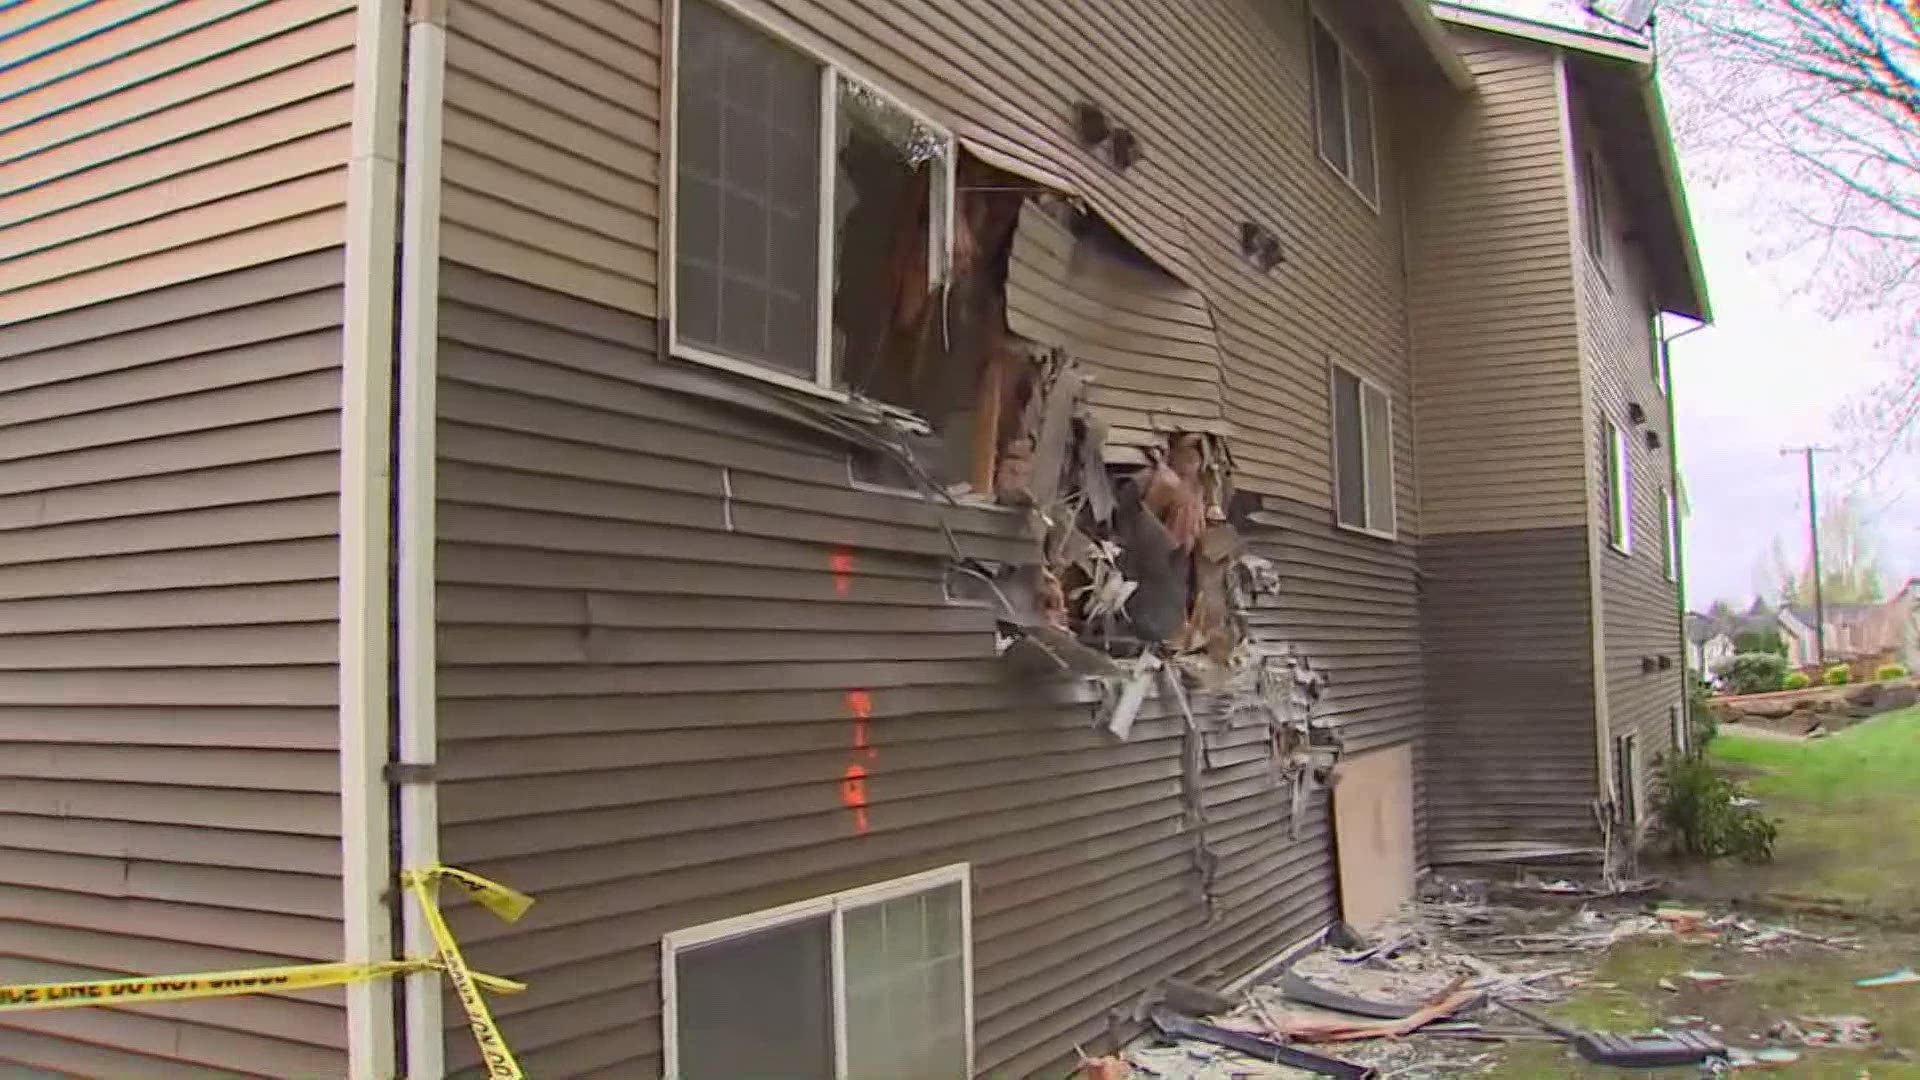 Six people and two dogs were in a vehicle that lost control and crashed into the second floor of an apartment building in Kent.